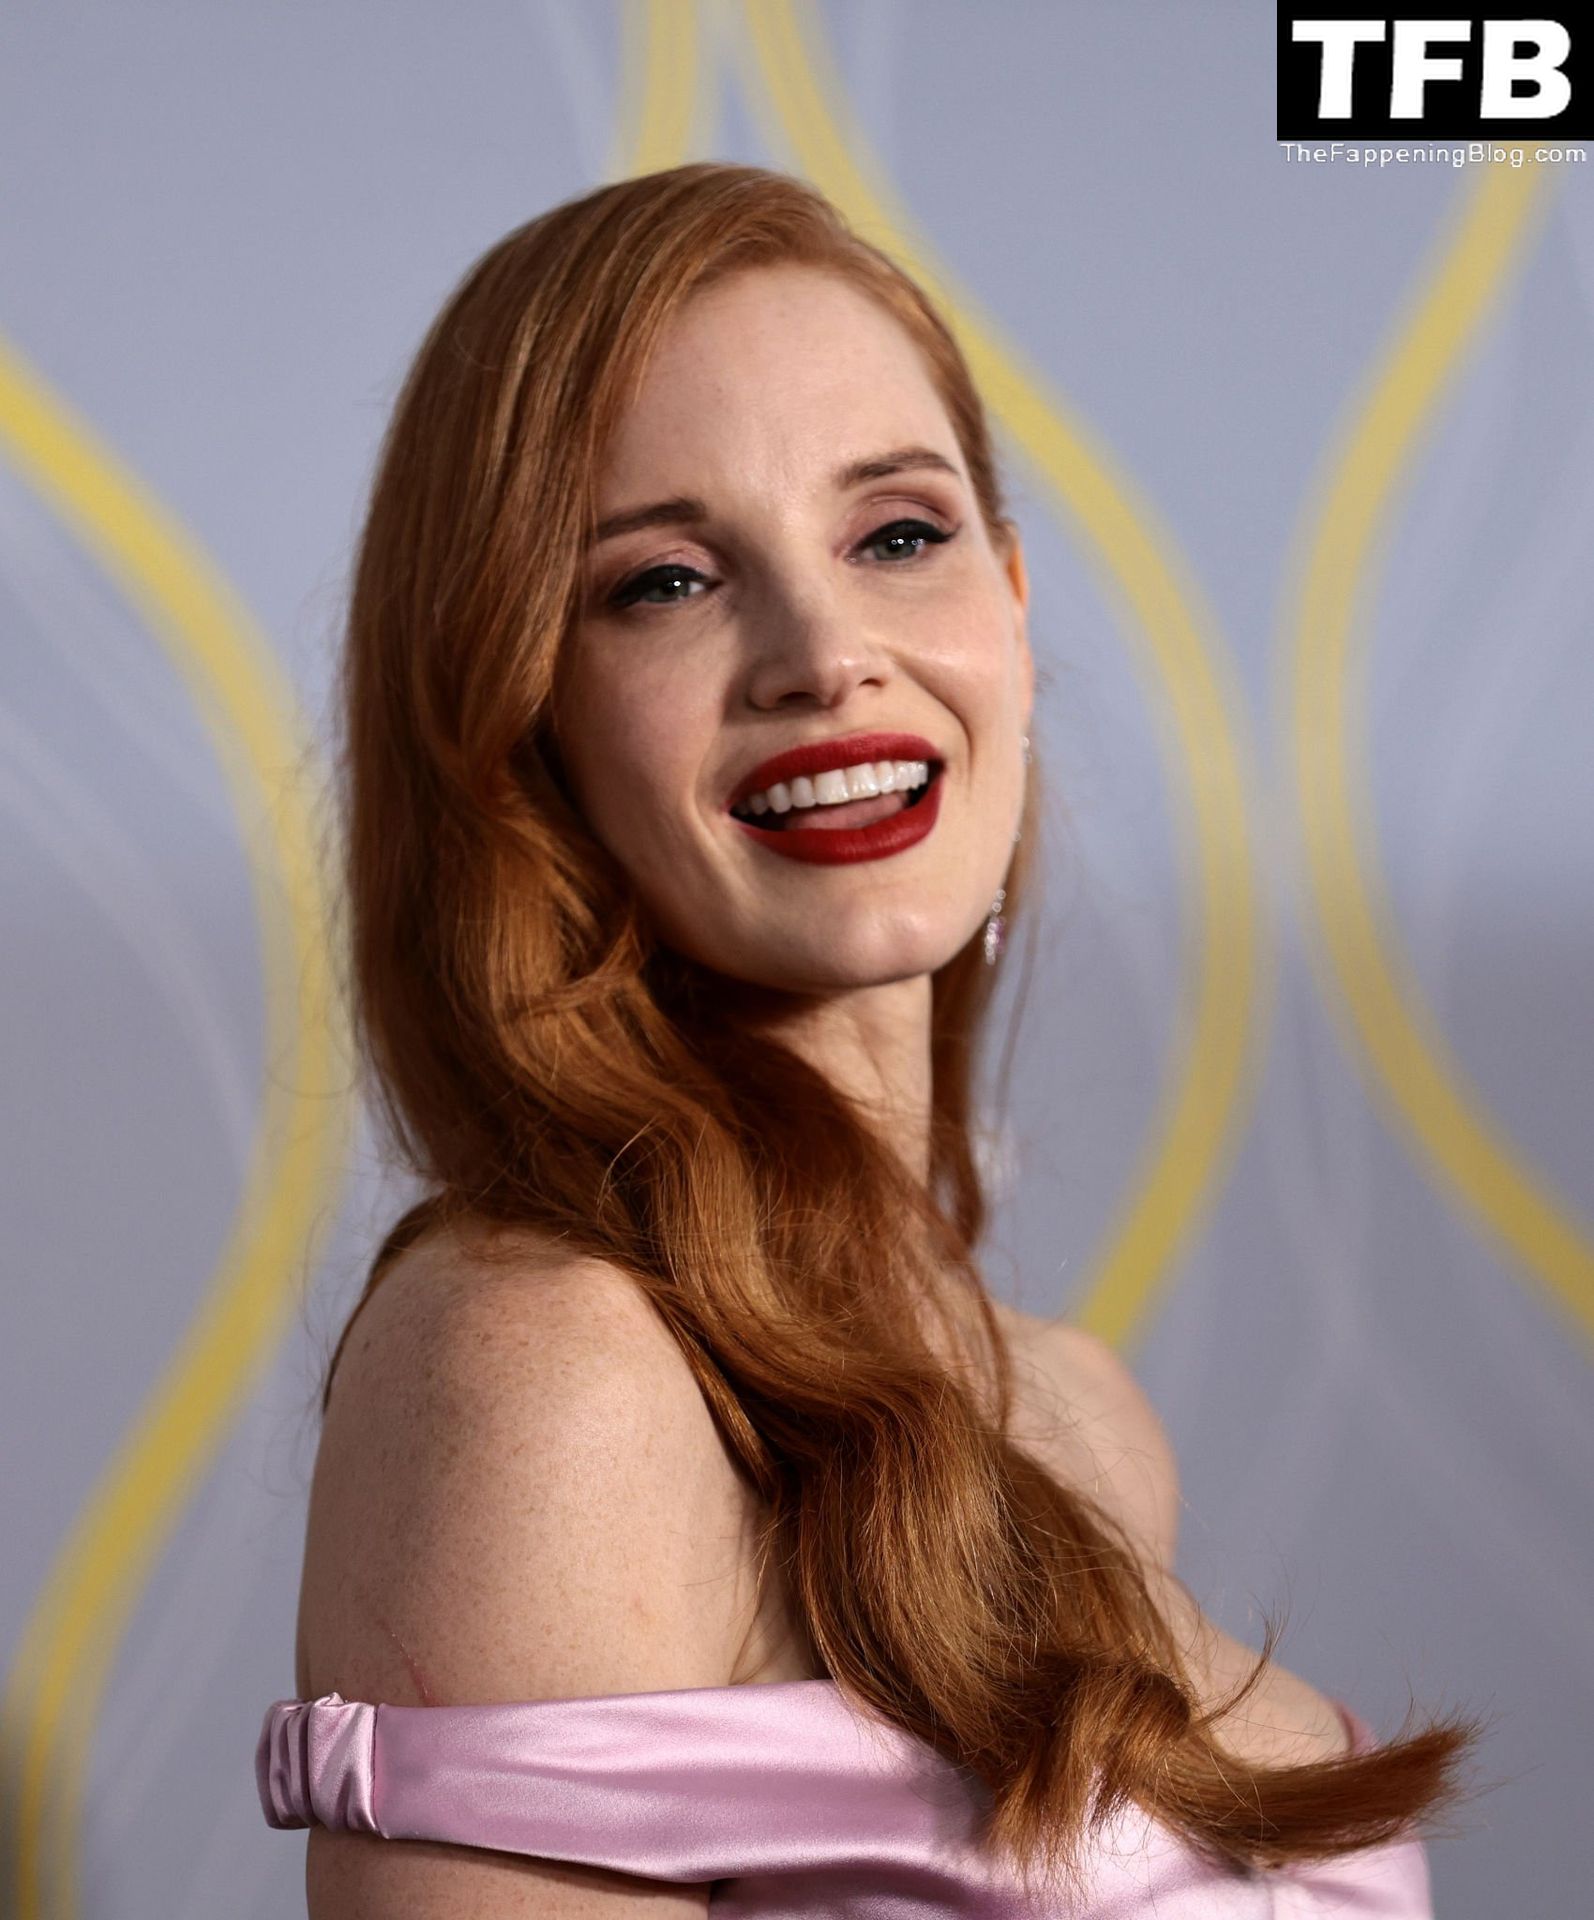 Jessica-Chastain-Sexy-The-Fappening-Blog-24.jpg